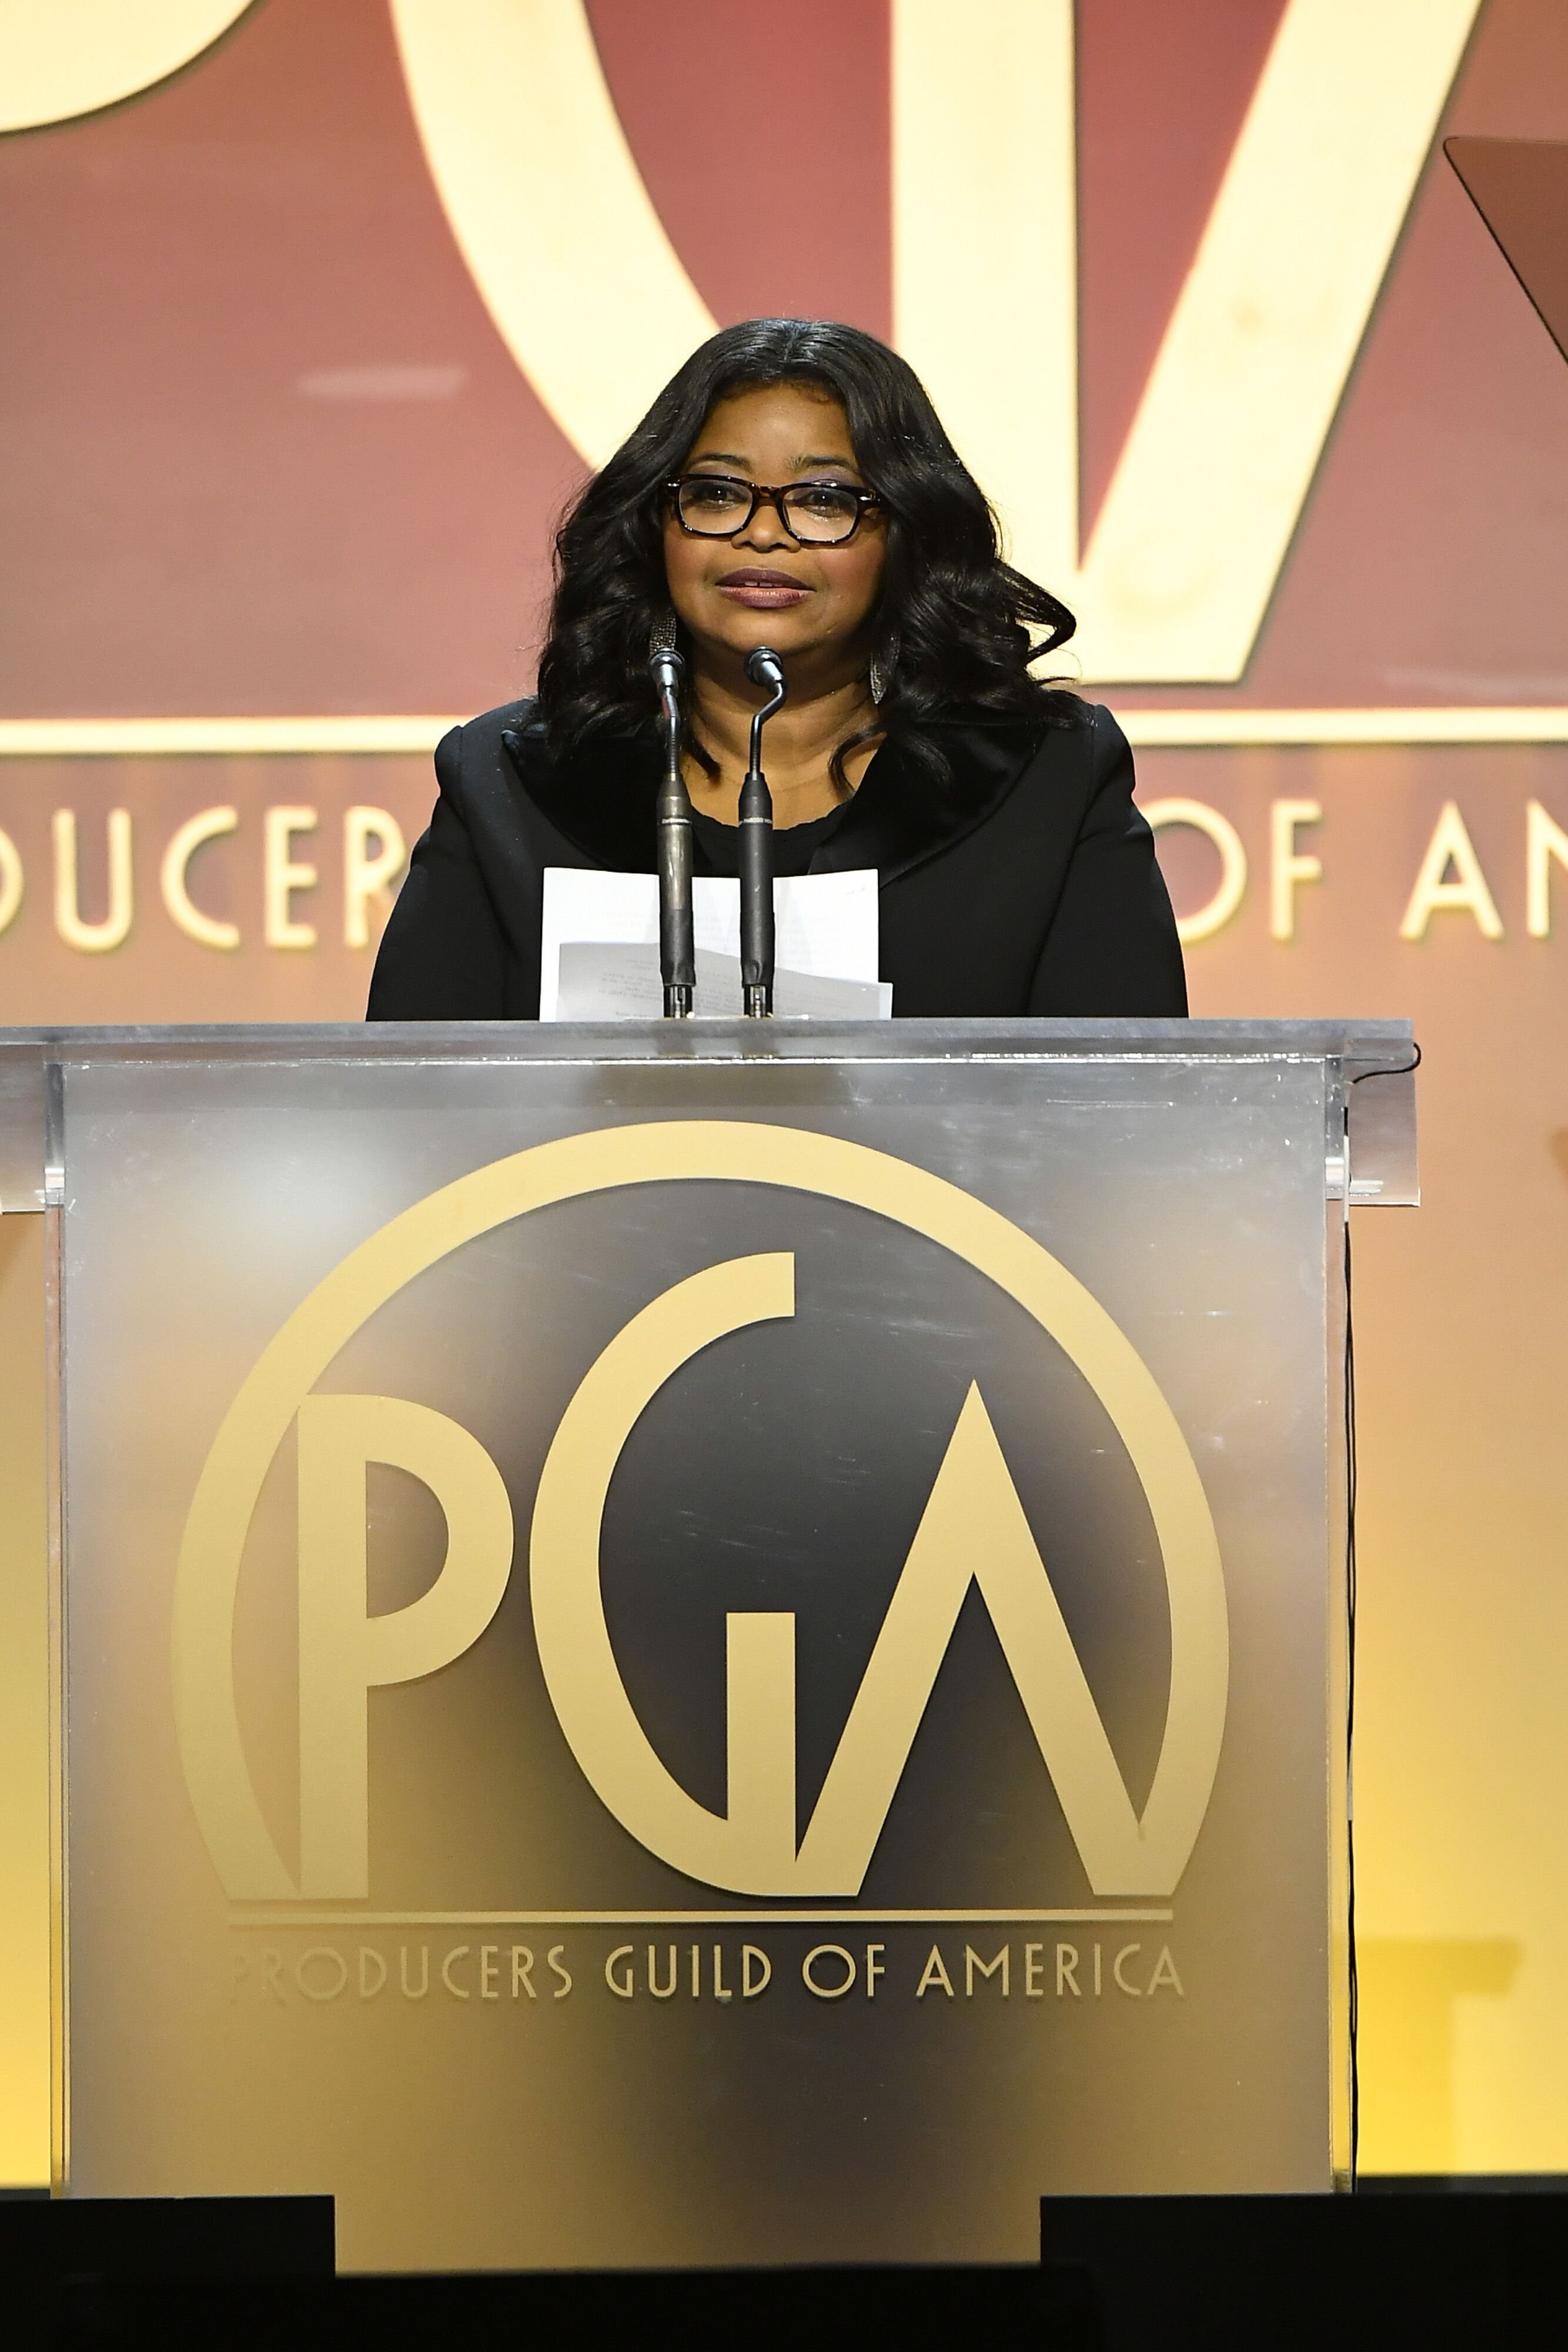 Actress Octavia Spencer at the 2020 Producers Guild Awards/ Source: Getty Images